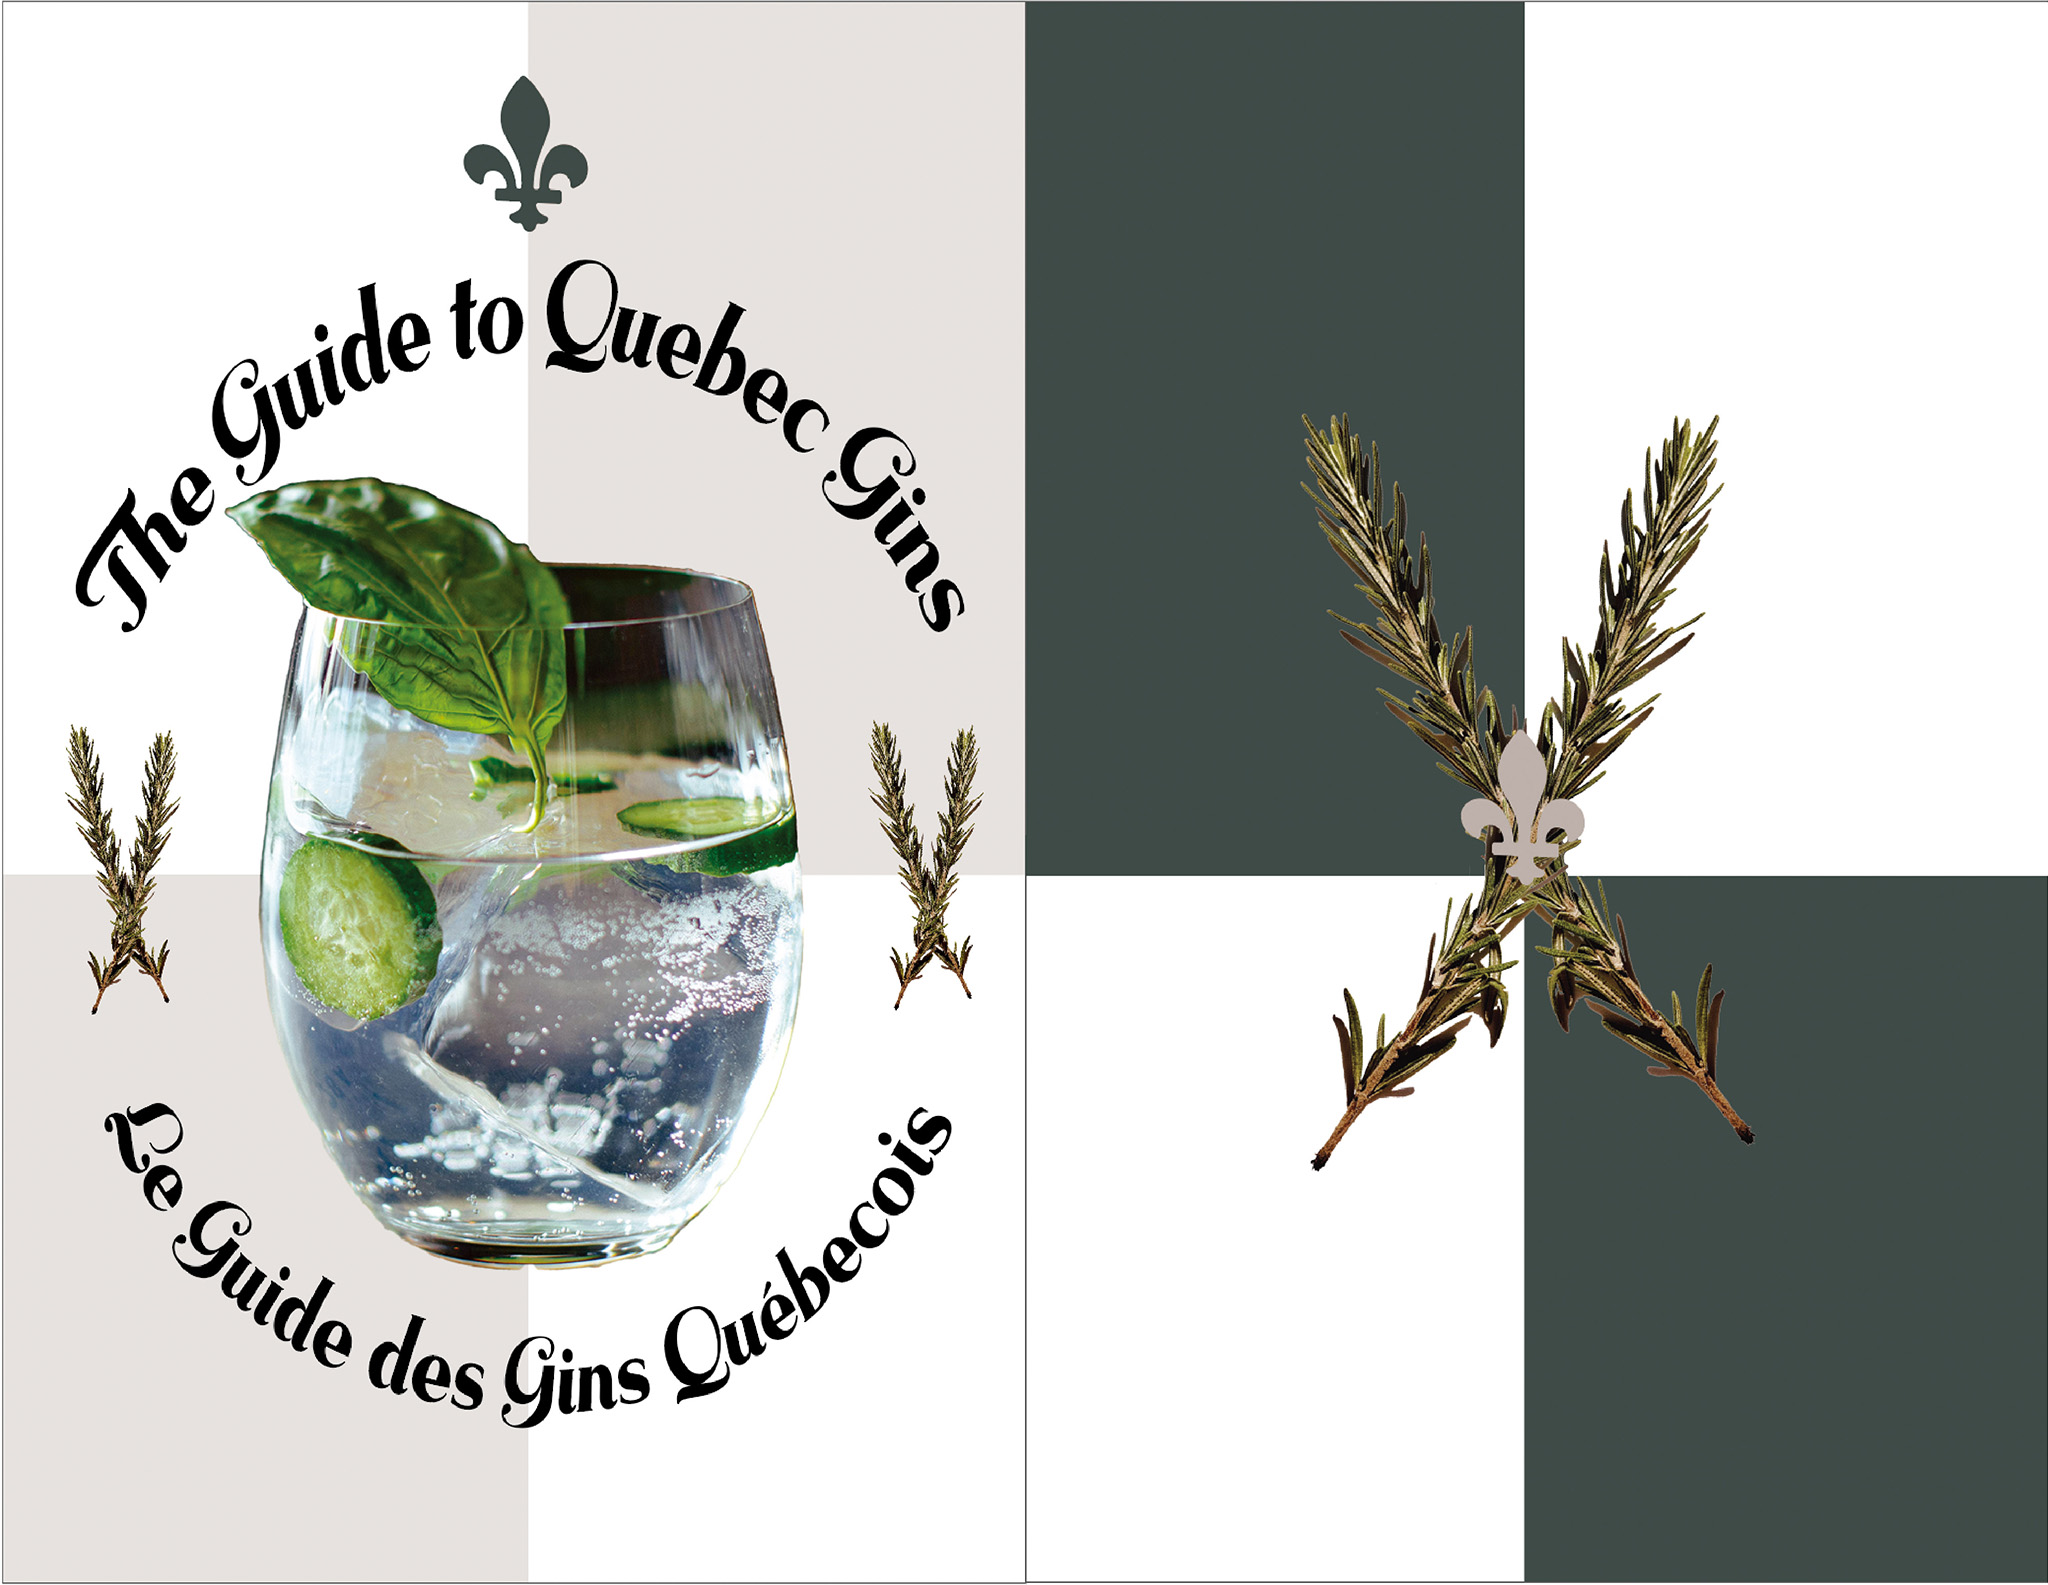 The Guide to Quebec Gins catalog cover and back. Cover features a large glass of gin with title below and above it, a fleur-de-lys on top and some crossed pine leaves on either side of the glass with a beige and white four square pattern. The back cover has the same pattern but in white and dark green with the same pine leaves but bigger and in the centre with a small fleur-de-lys at the centre of them.